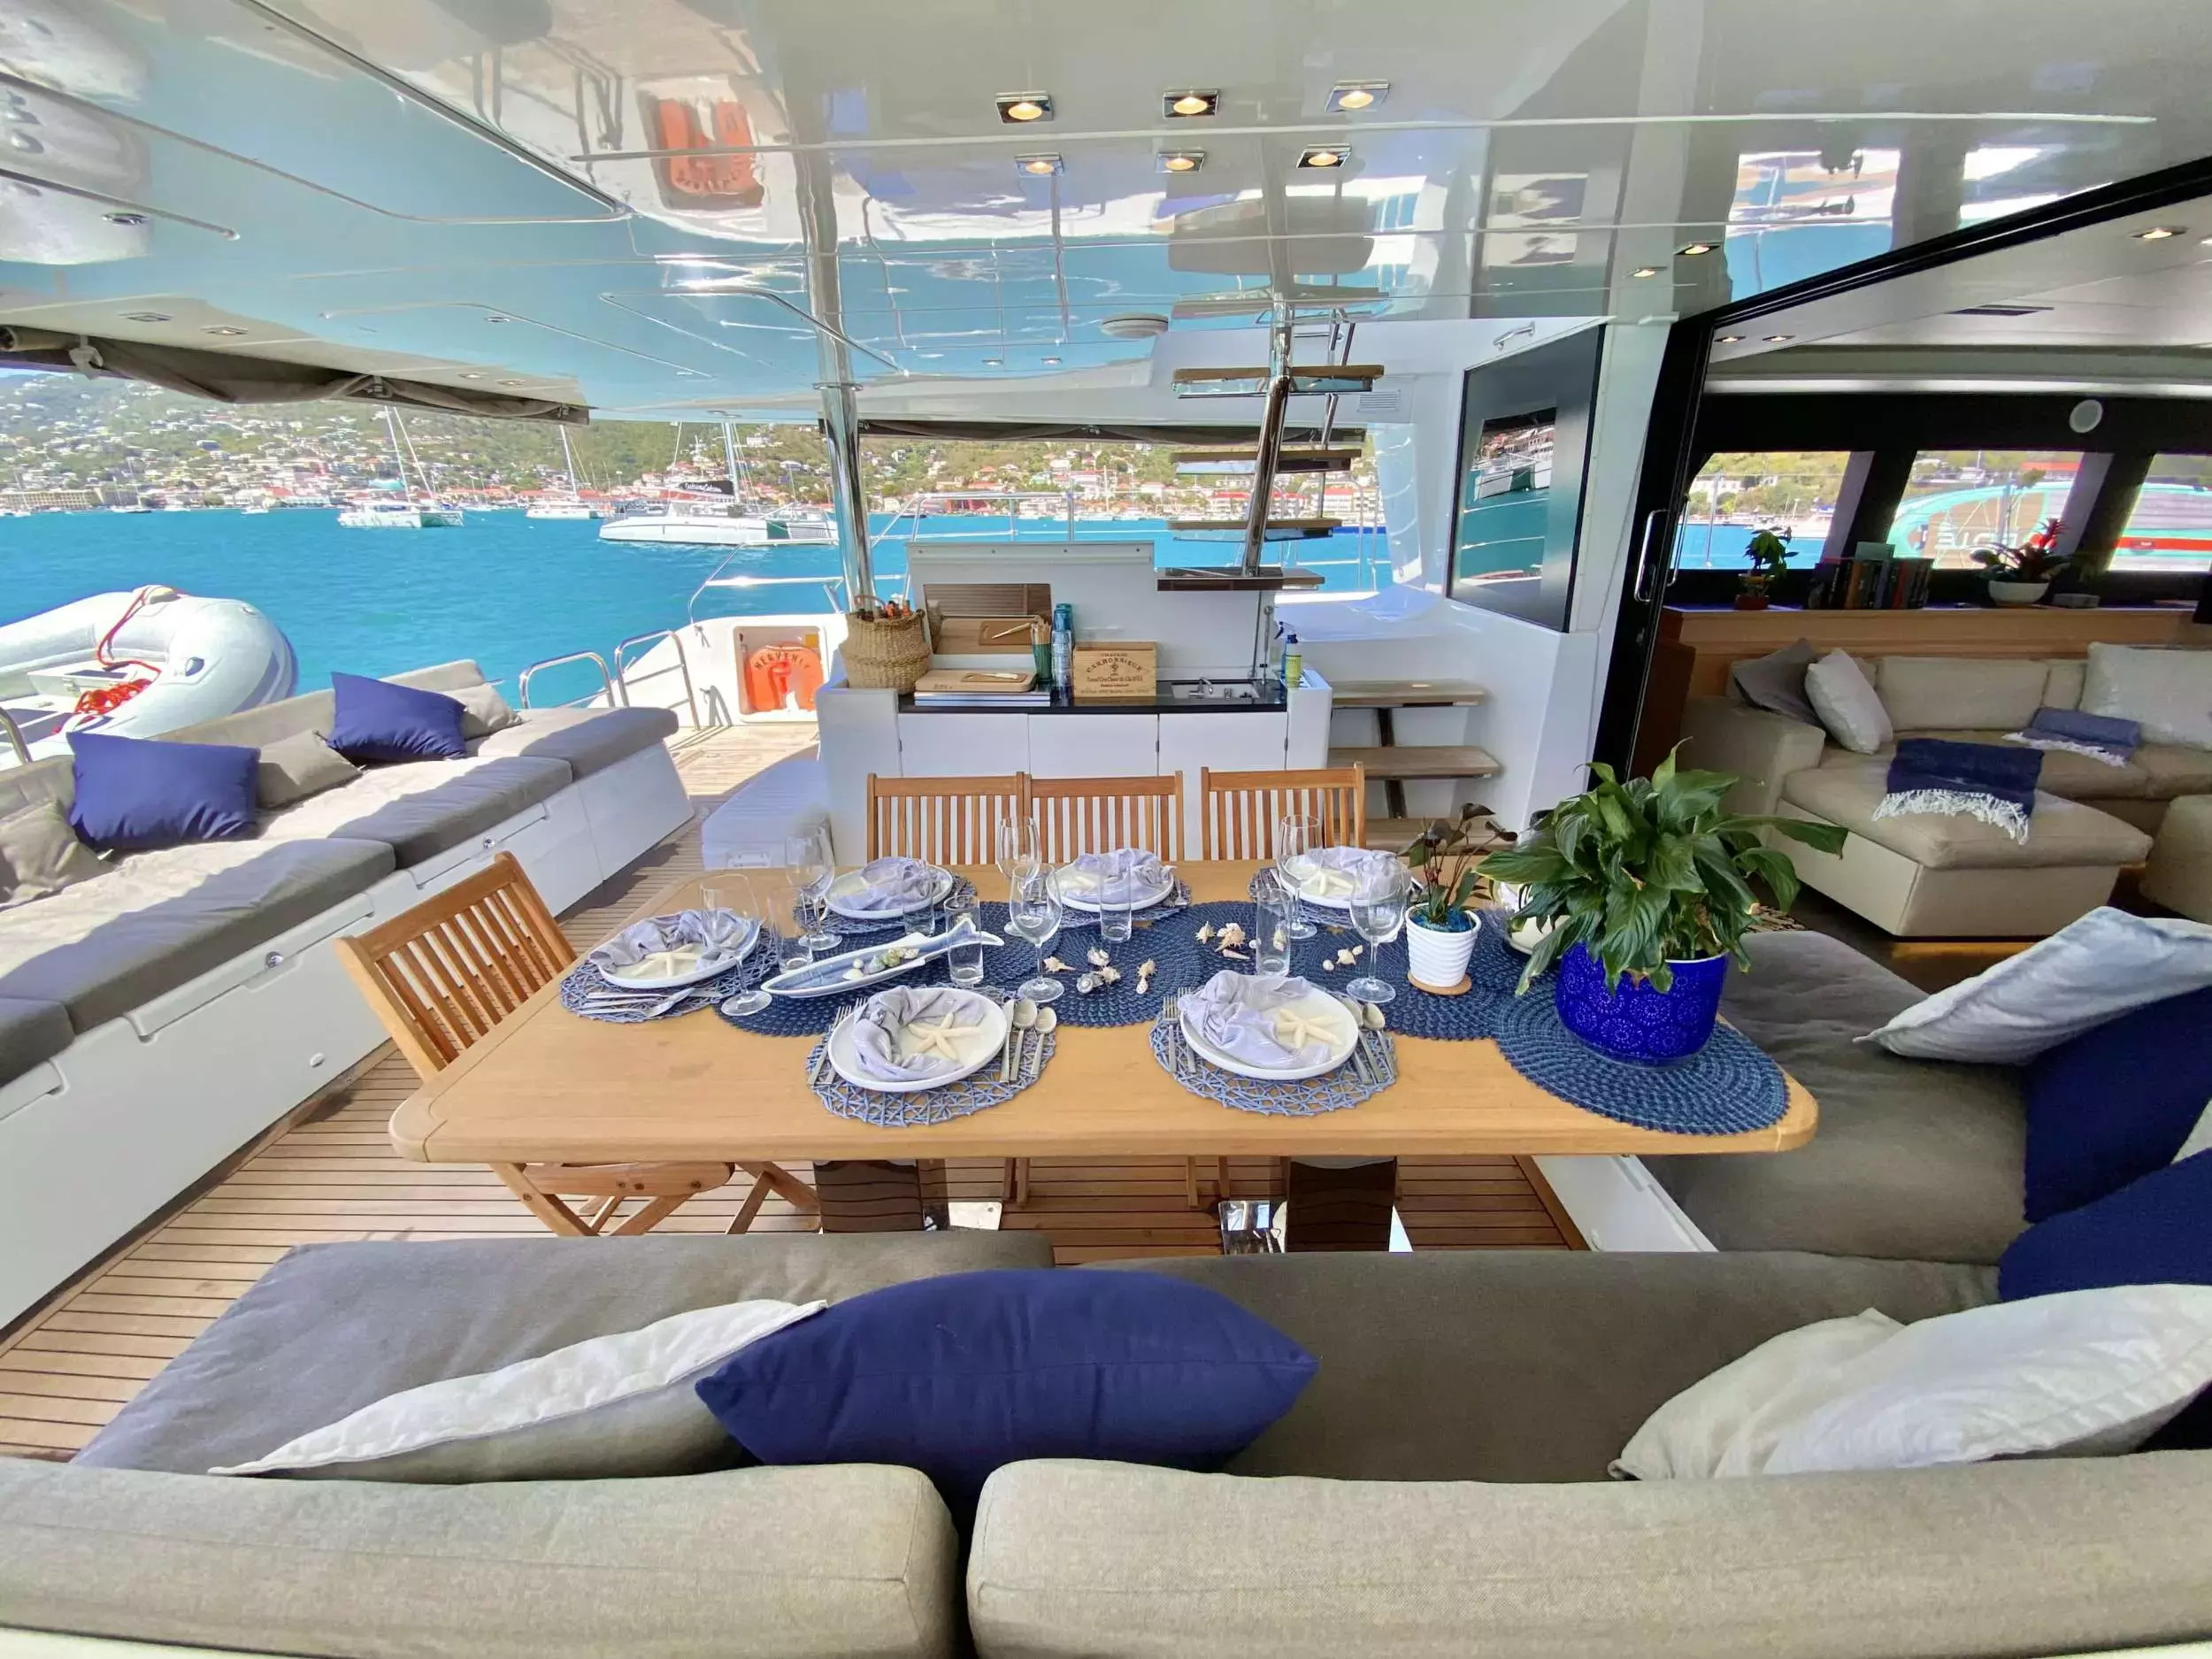 Heavenly by Lagoon - Top rates for a Charter of a private Sailing Catamaran in US Virgin Islands